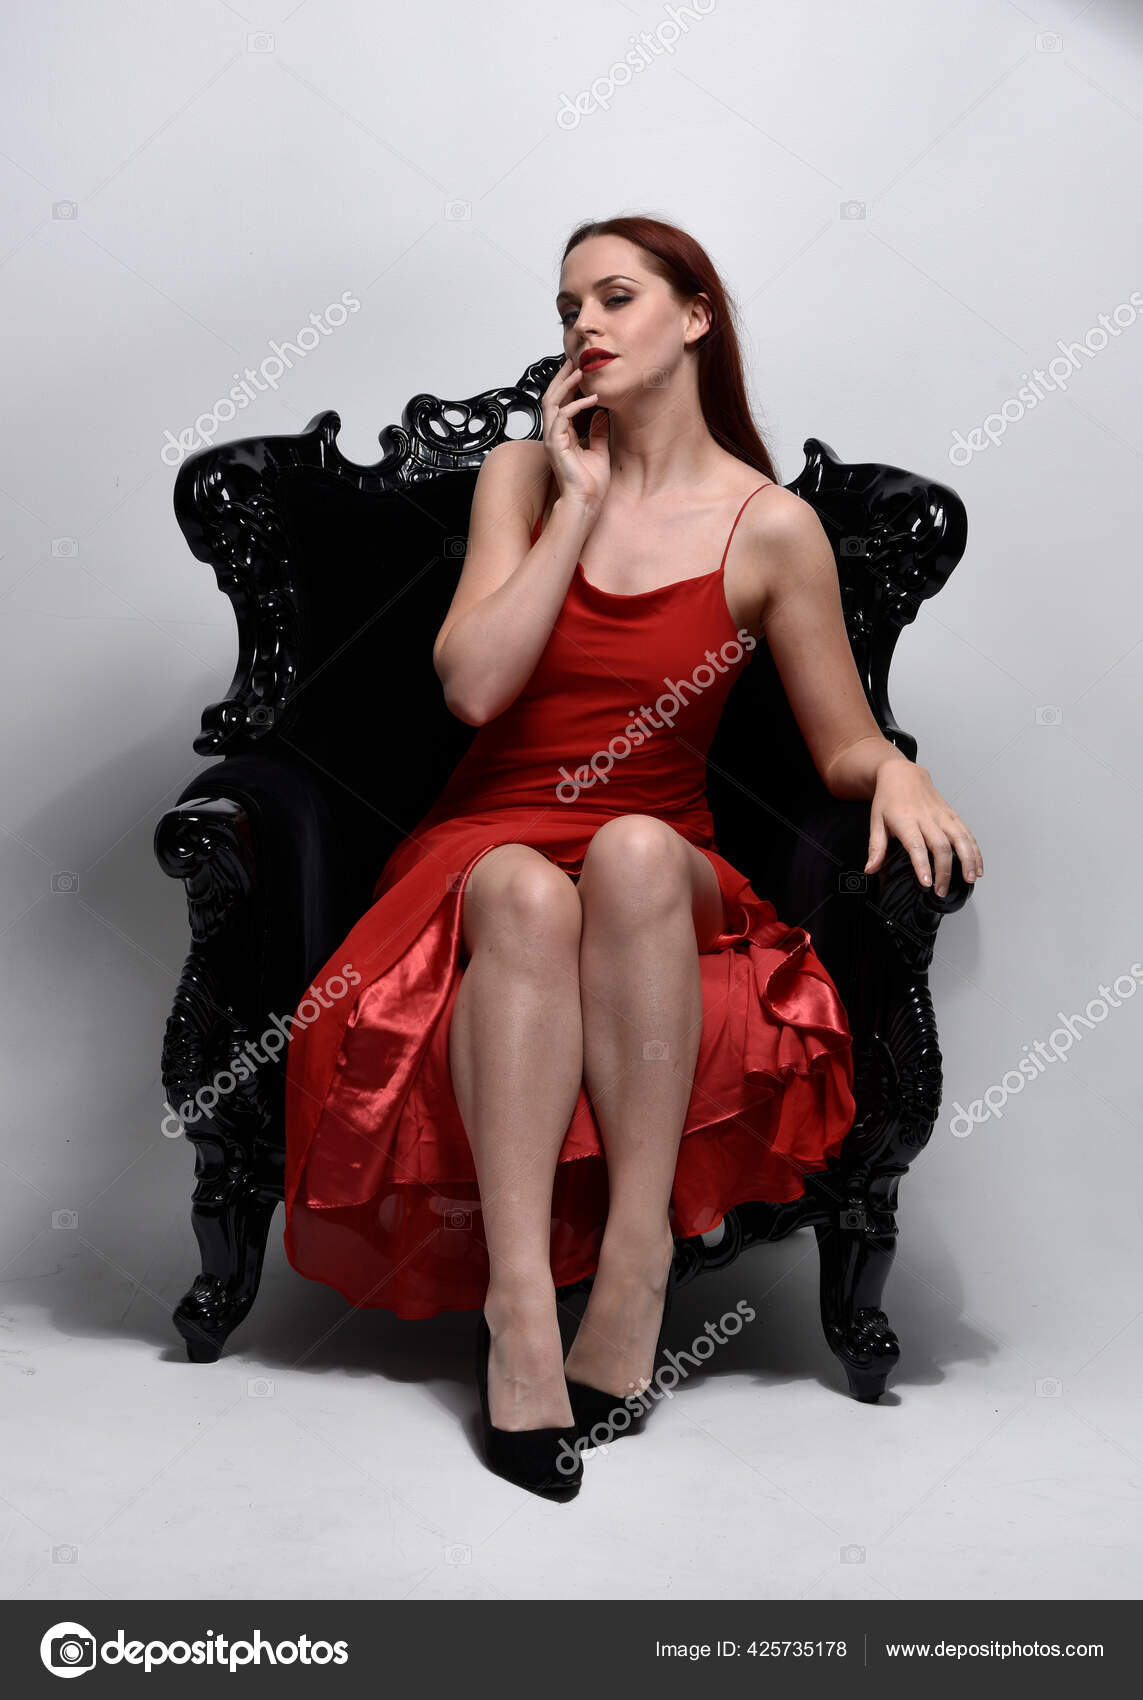 Image Brown haired blurred background Pose young woman Legs Asiatic